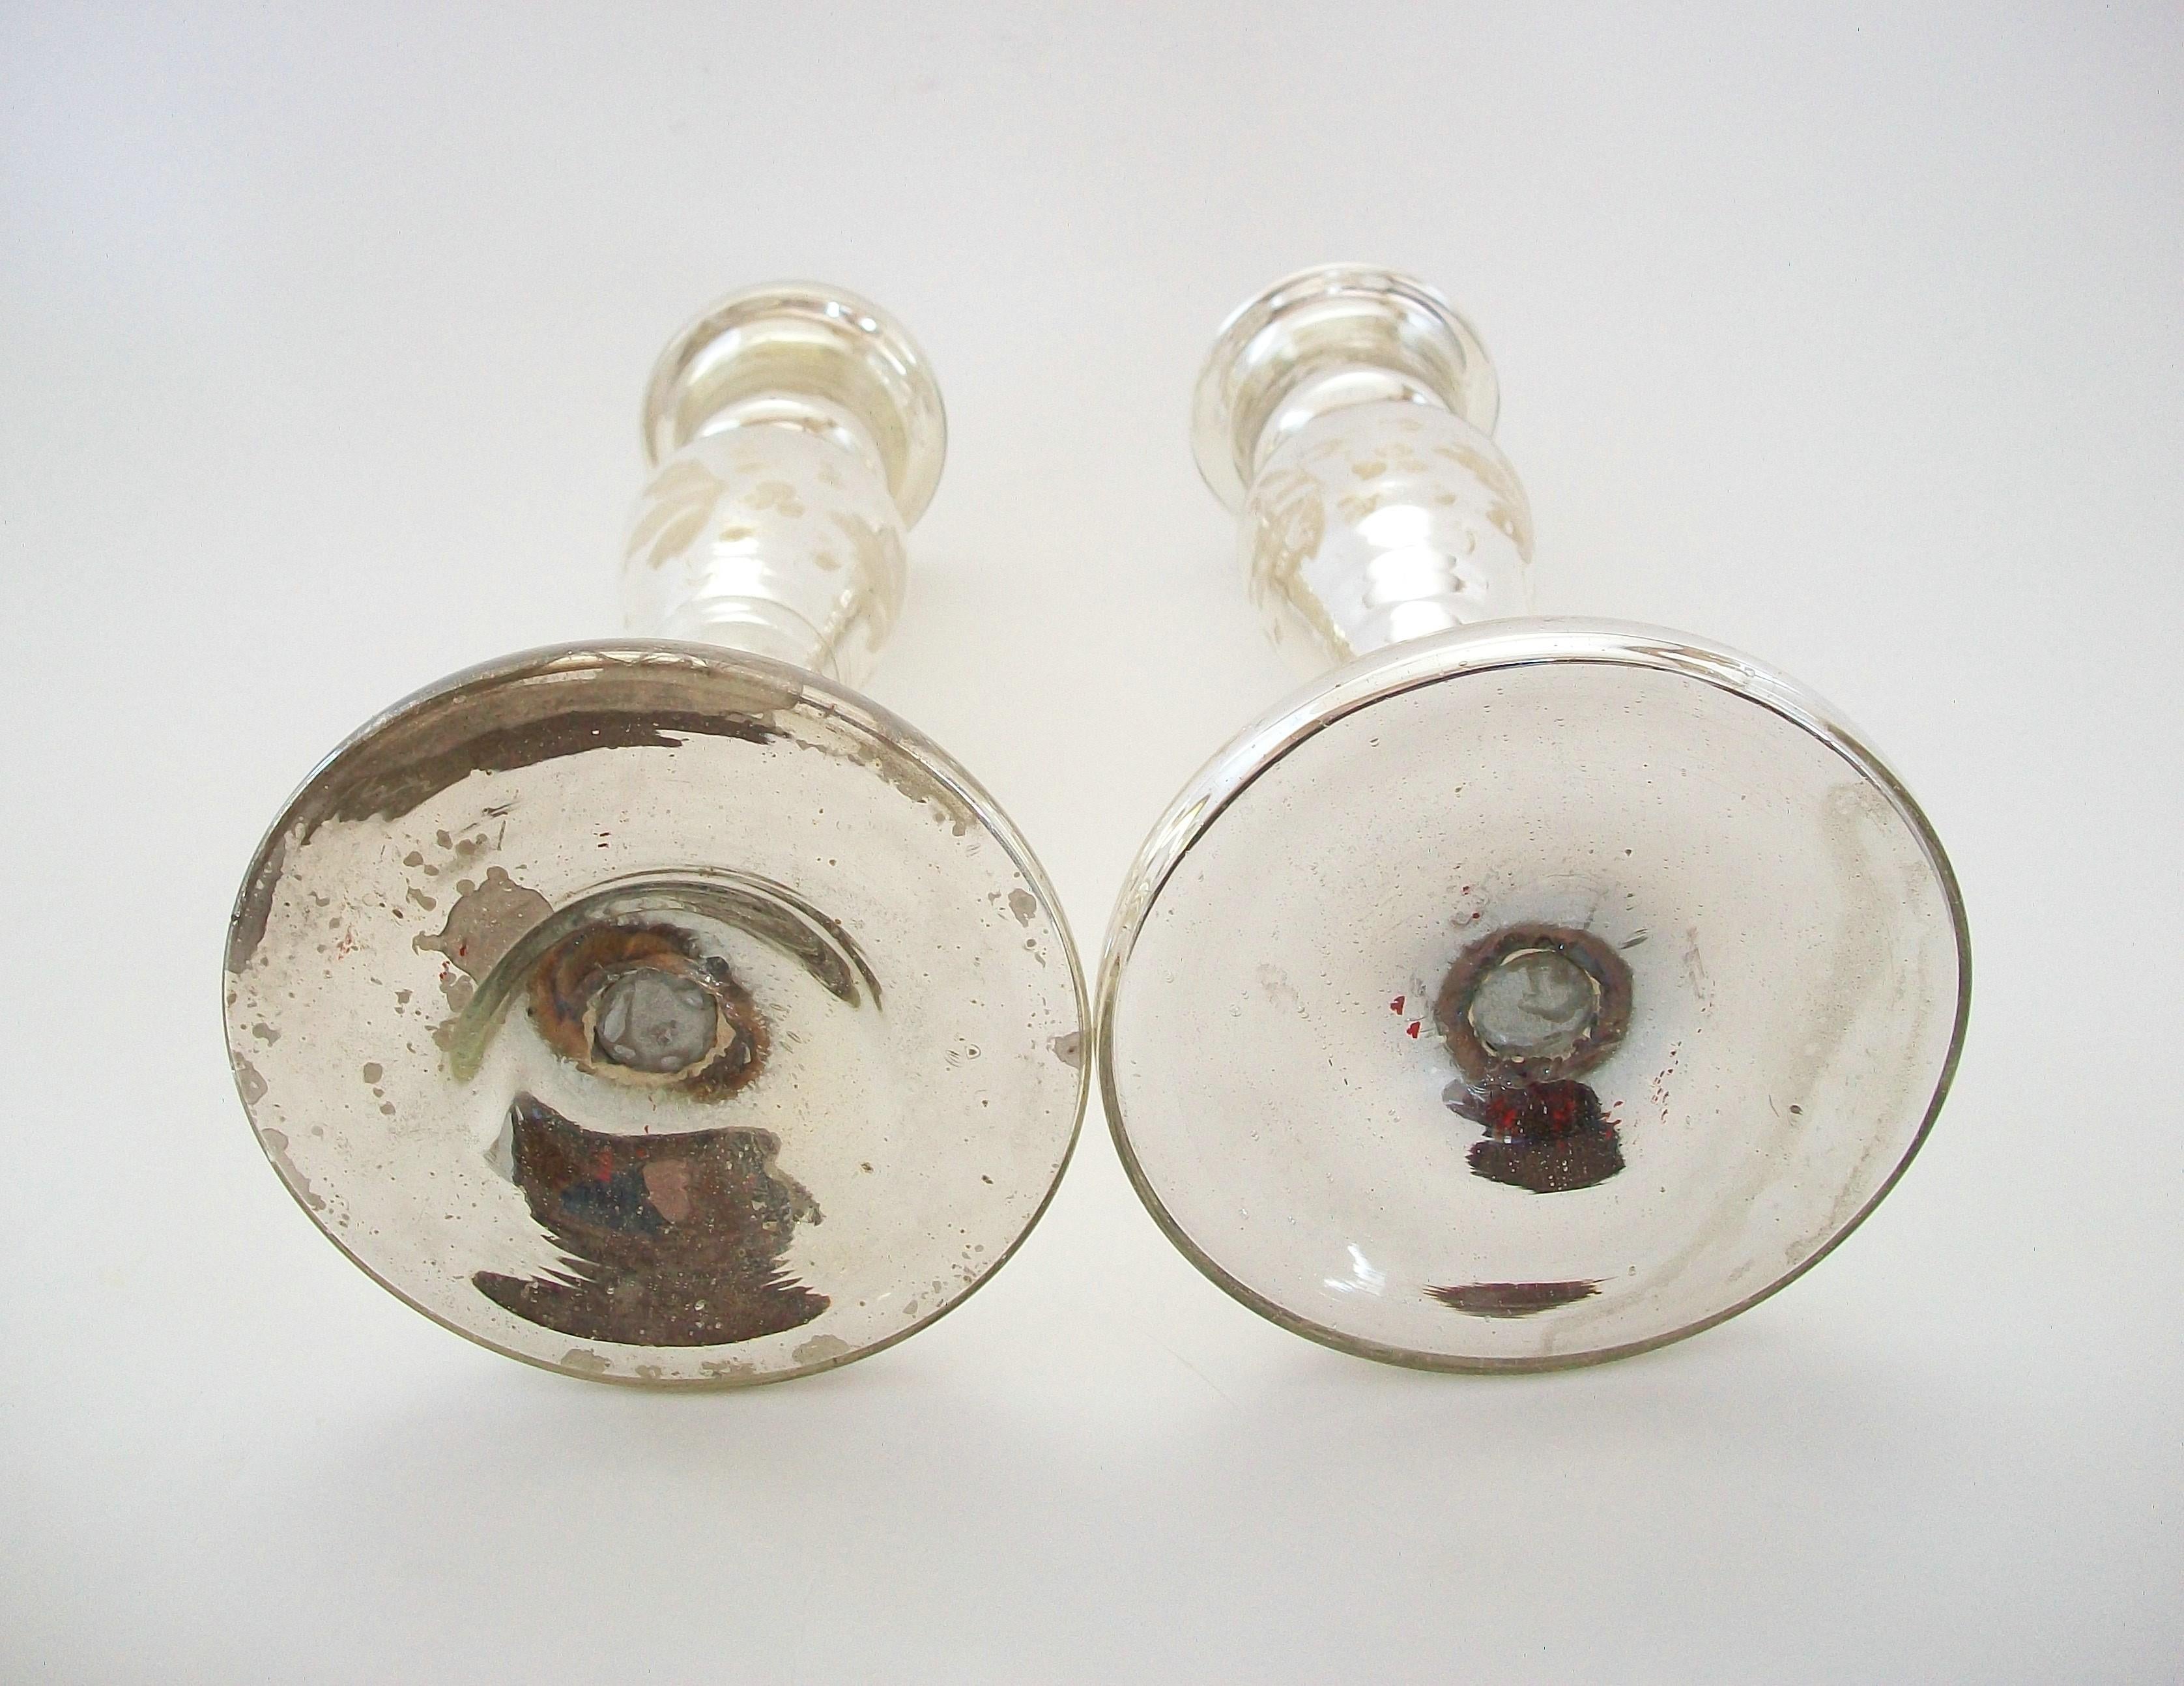 Antique Pair of White Painted Mercury Glass Candlesticks - France - Circa 1880 For Sale 3